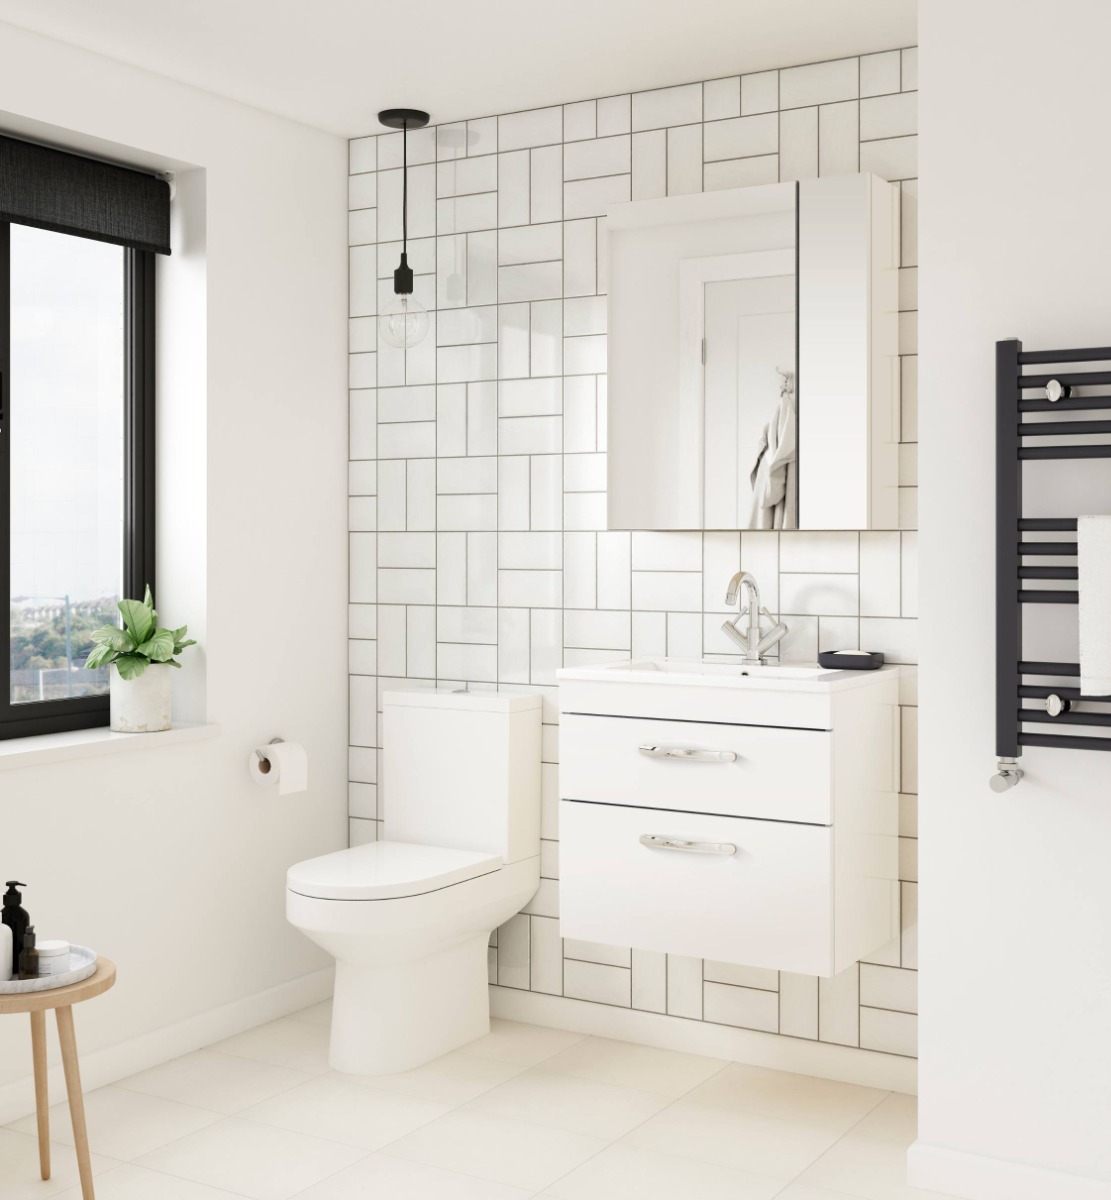 black and white bathroom with pendant lighting